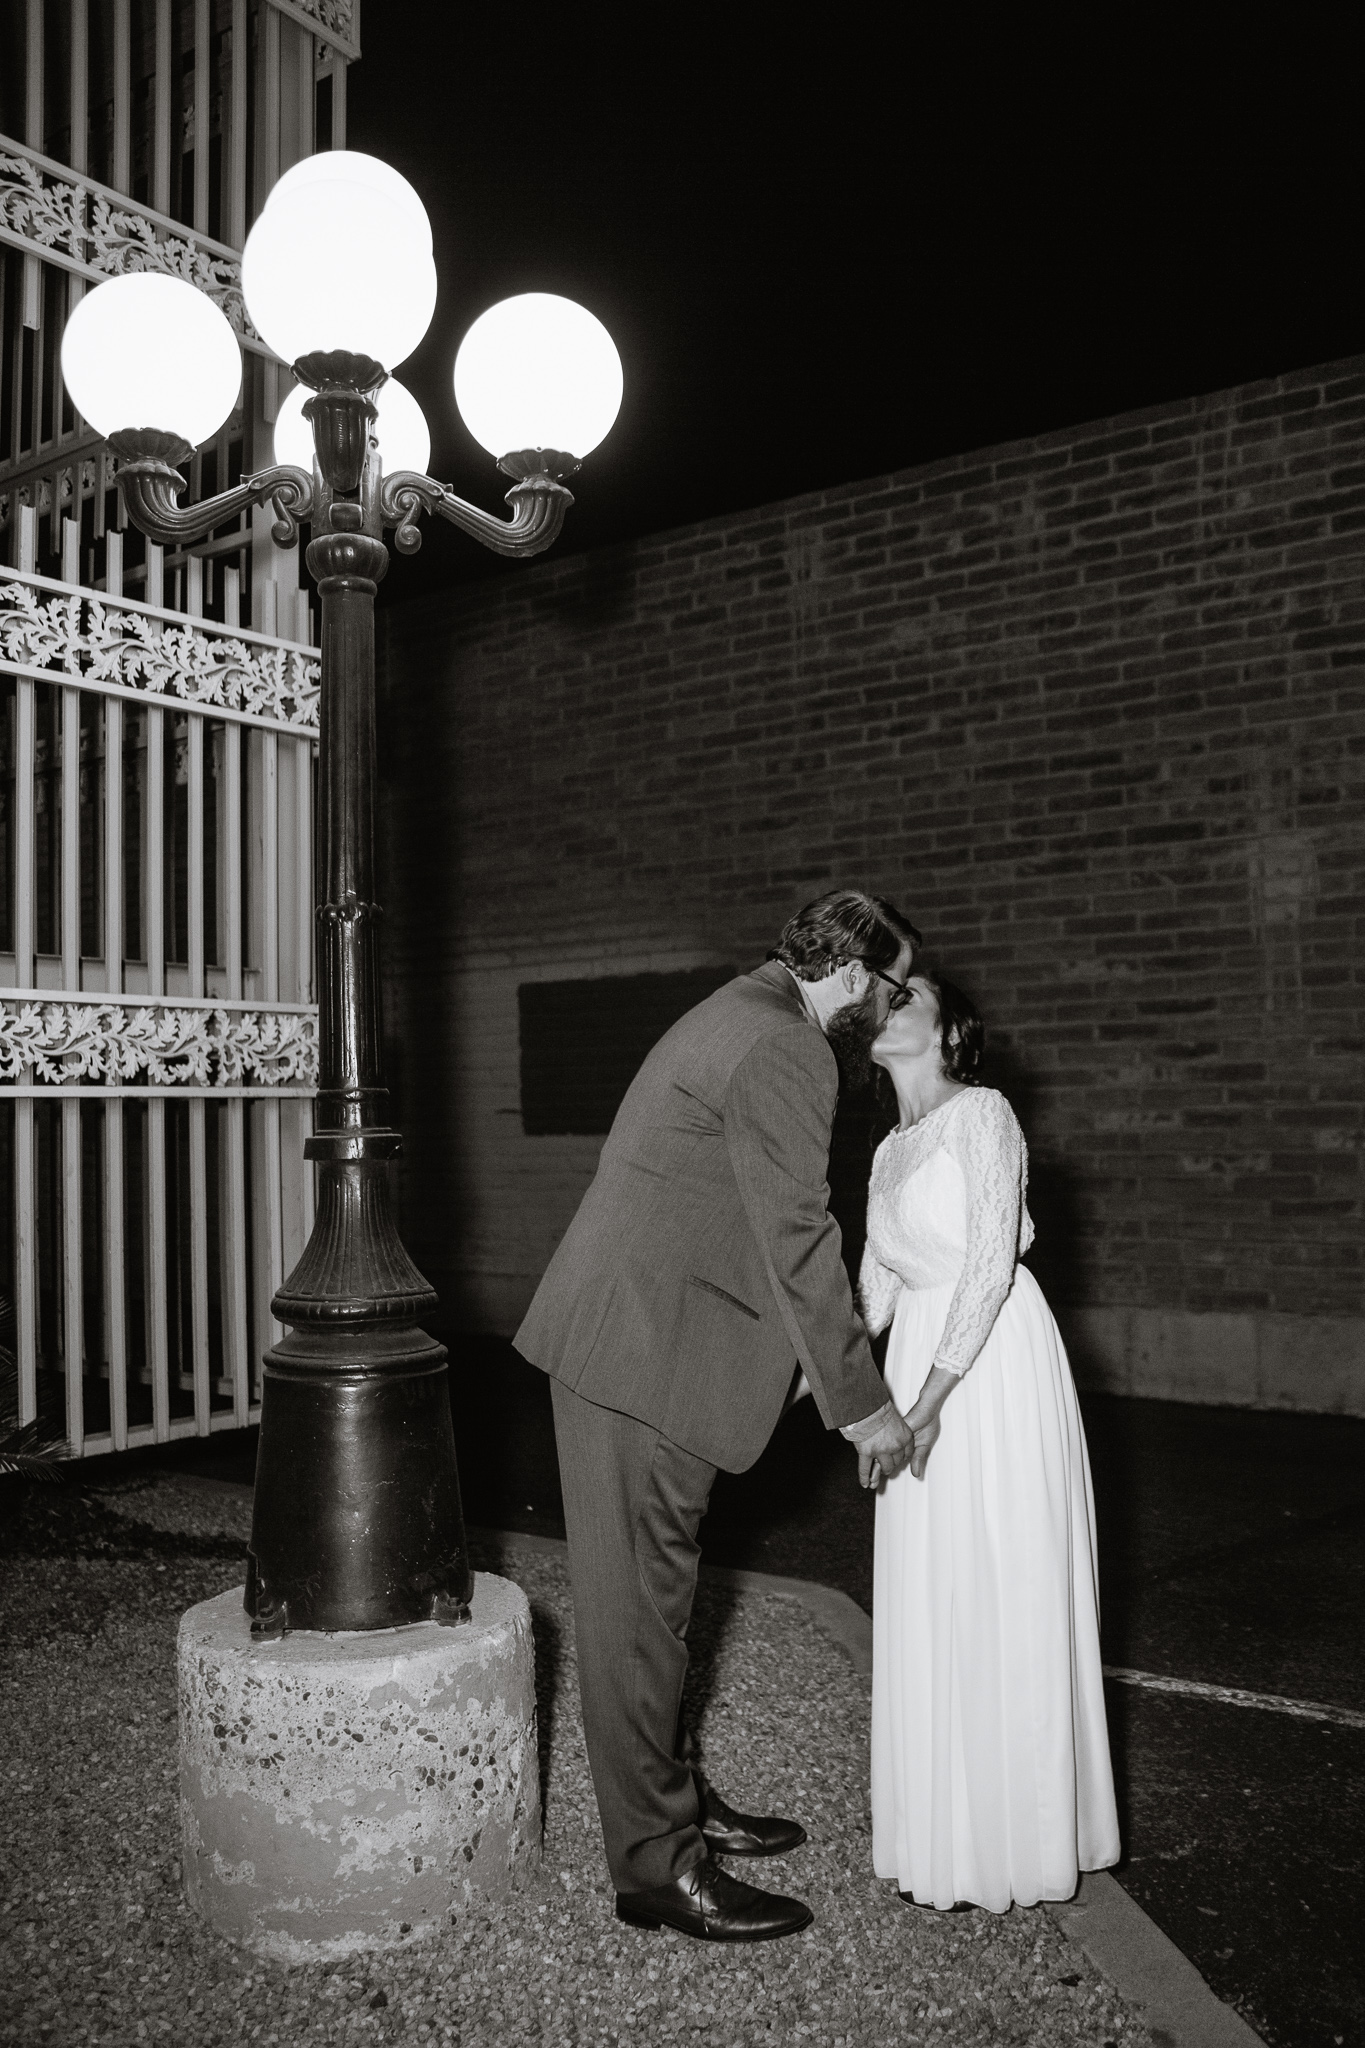 Vintage inspired bride and groom in front of a vintage stairwell and lamp on their wedding day.